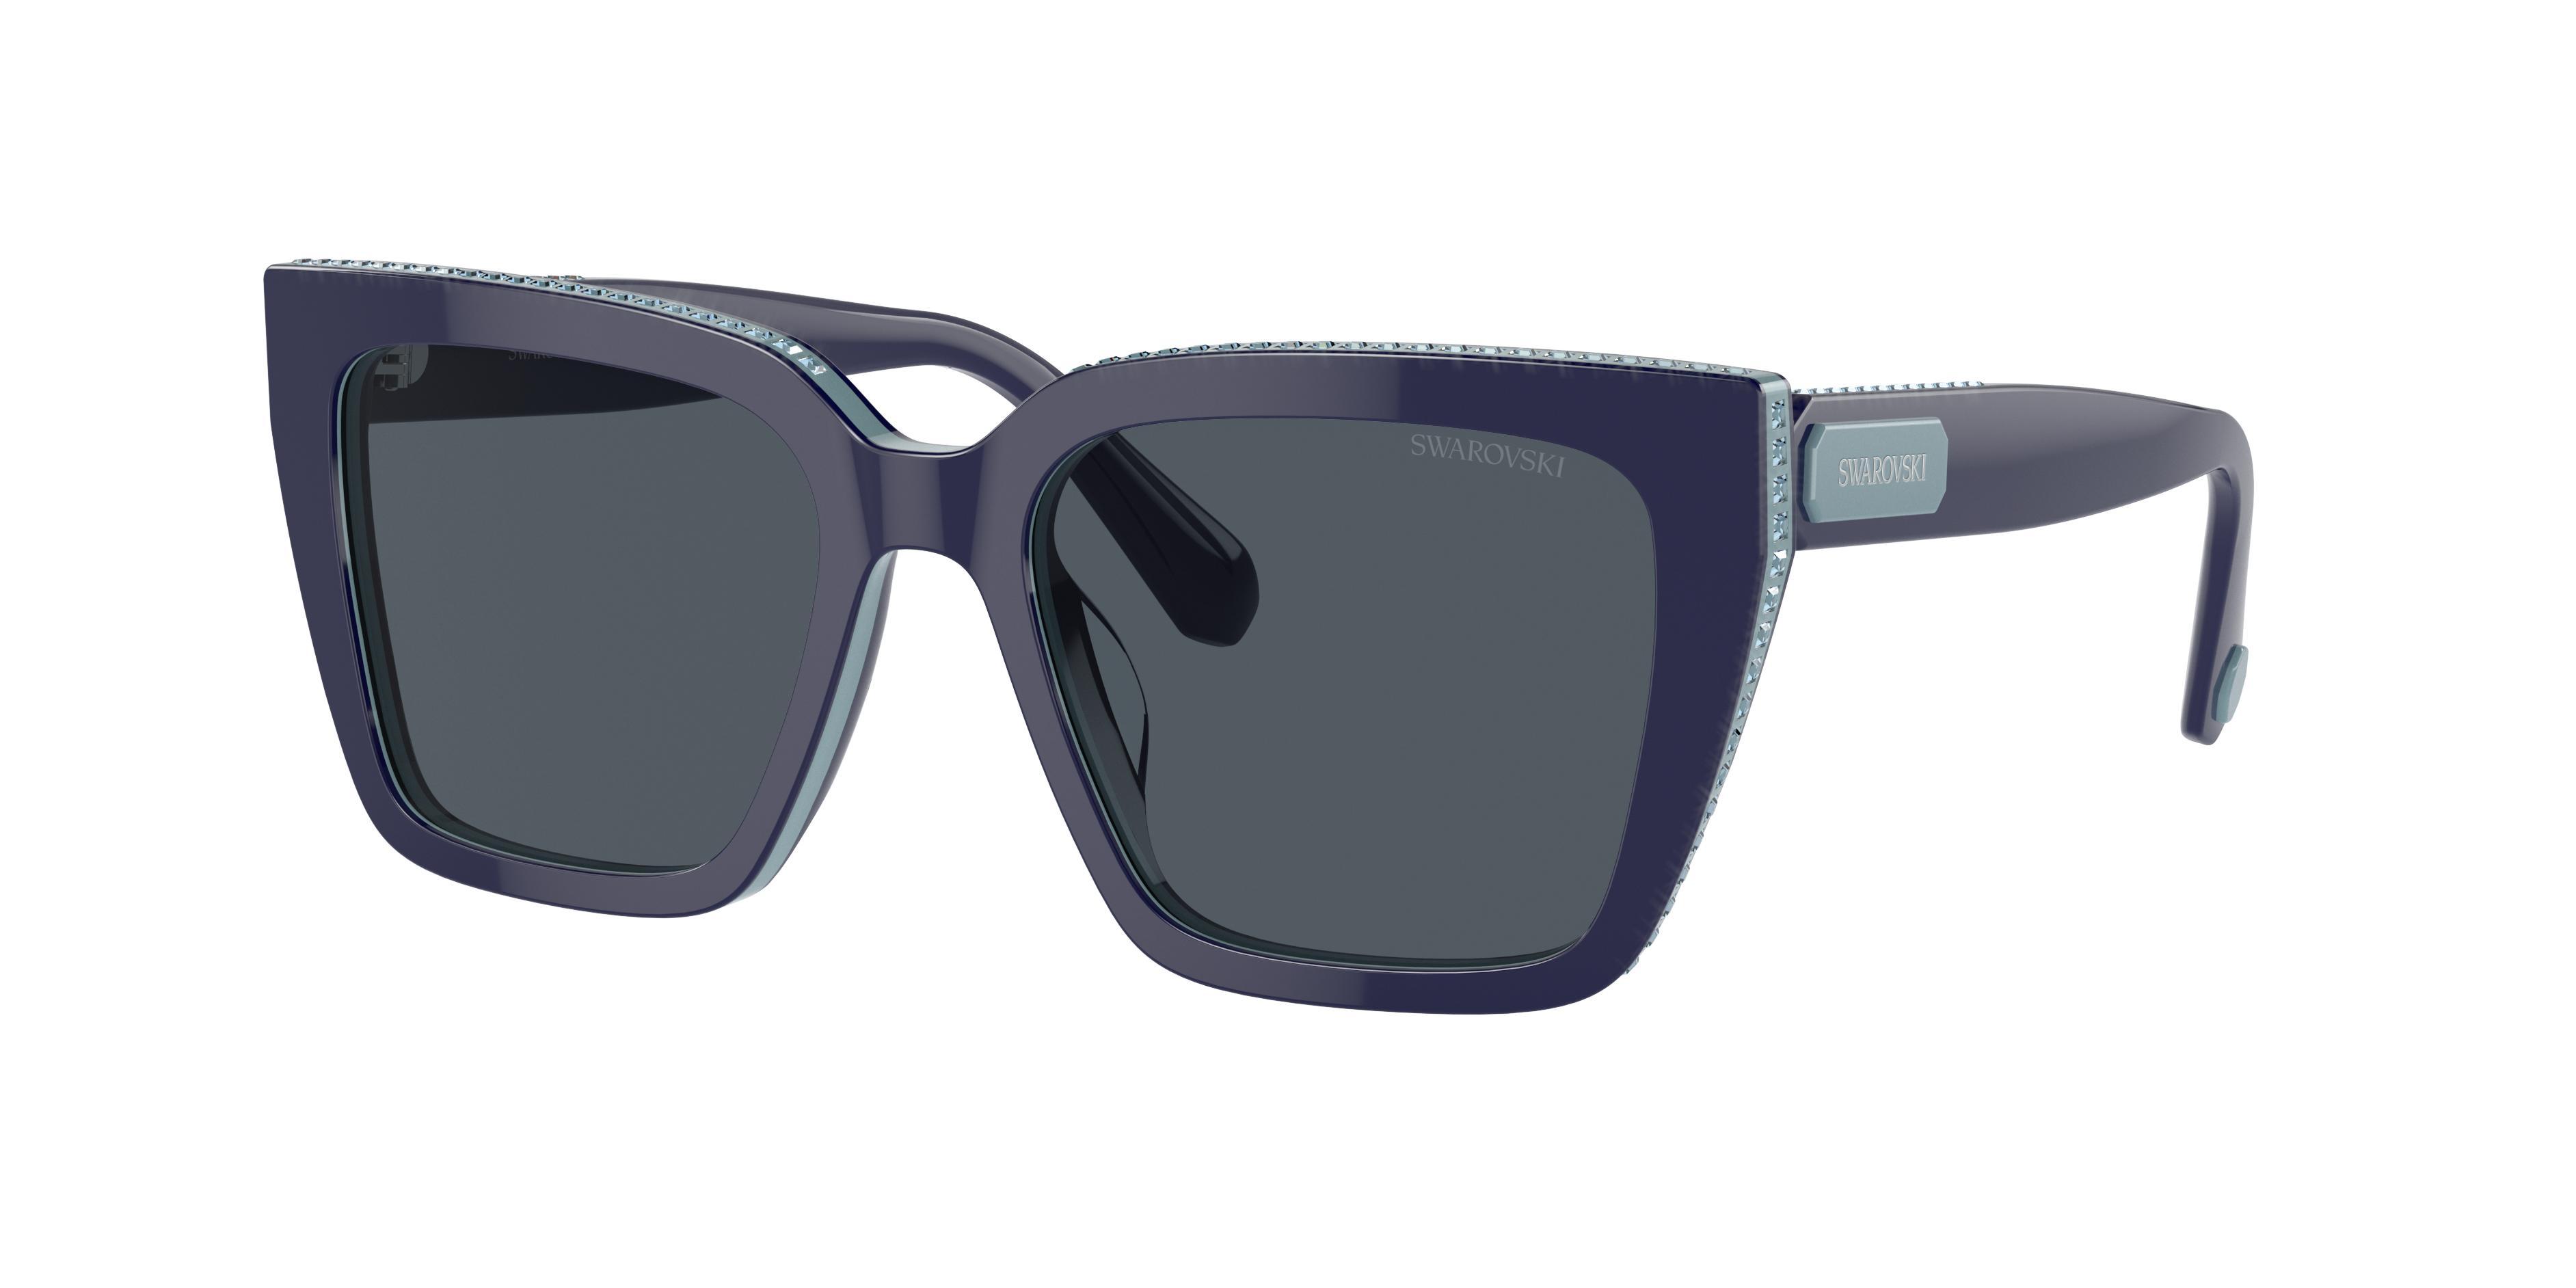 Persol x Dolce & Gabbana Rectangle Acetate Sunglasses Product Image